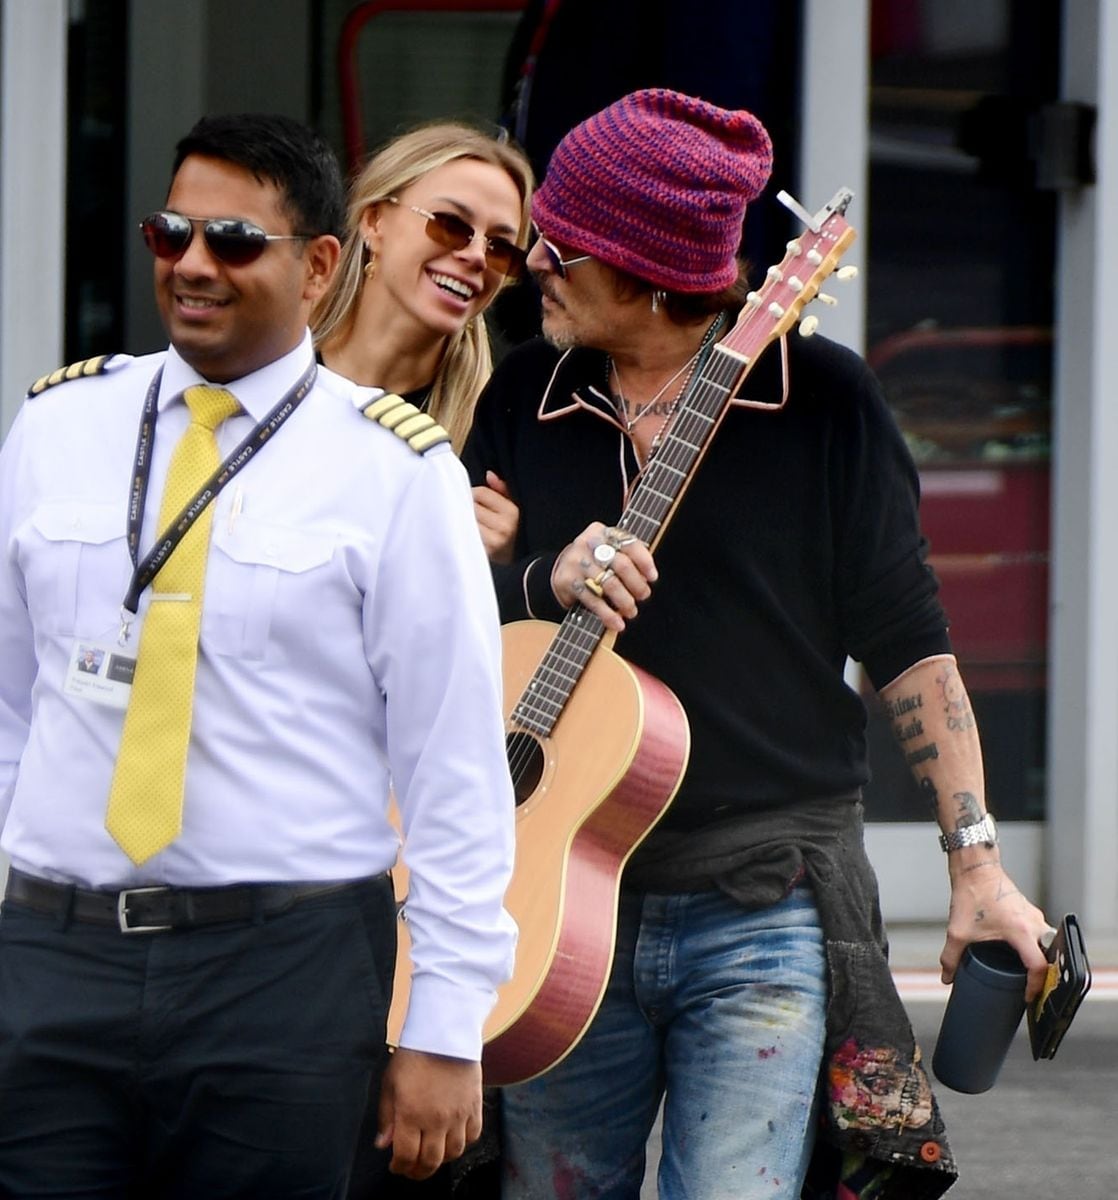 The couple was all smiles with Depp carrying his acoustic guitar ready to serenade 